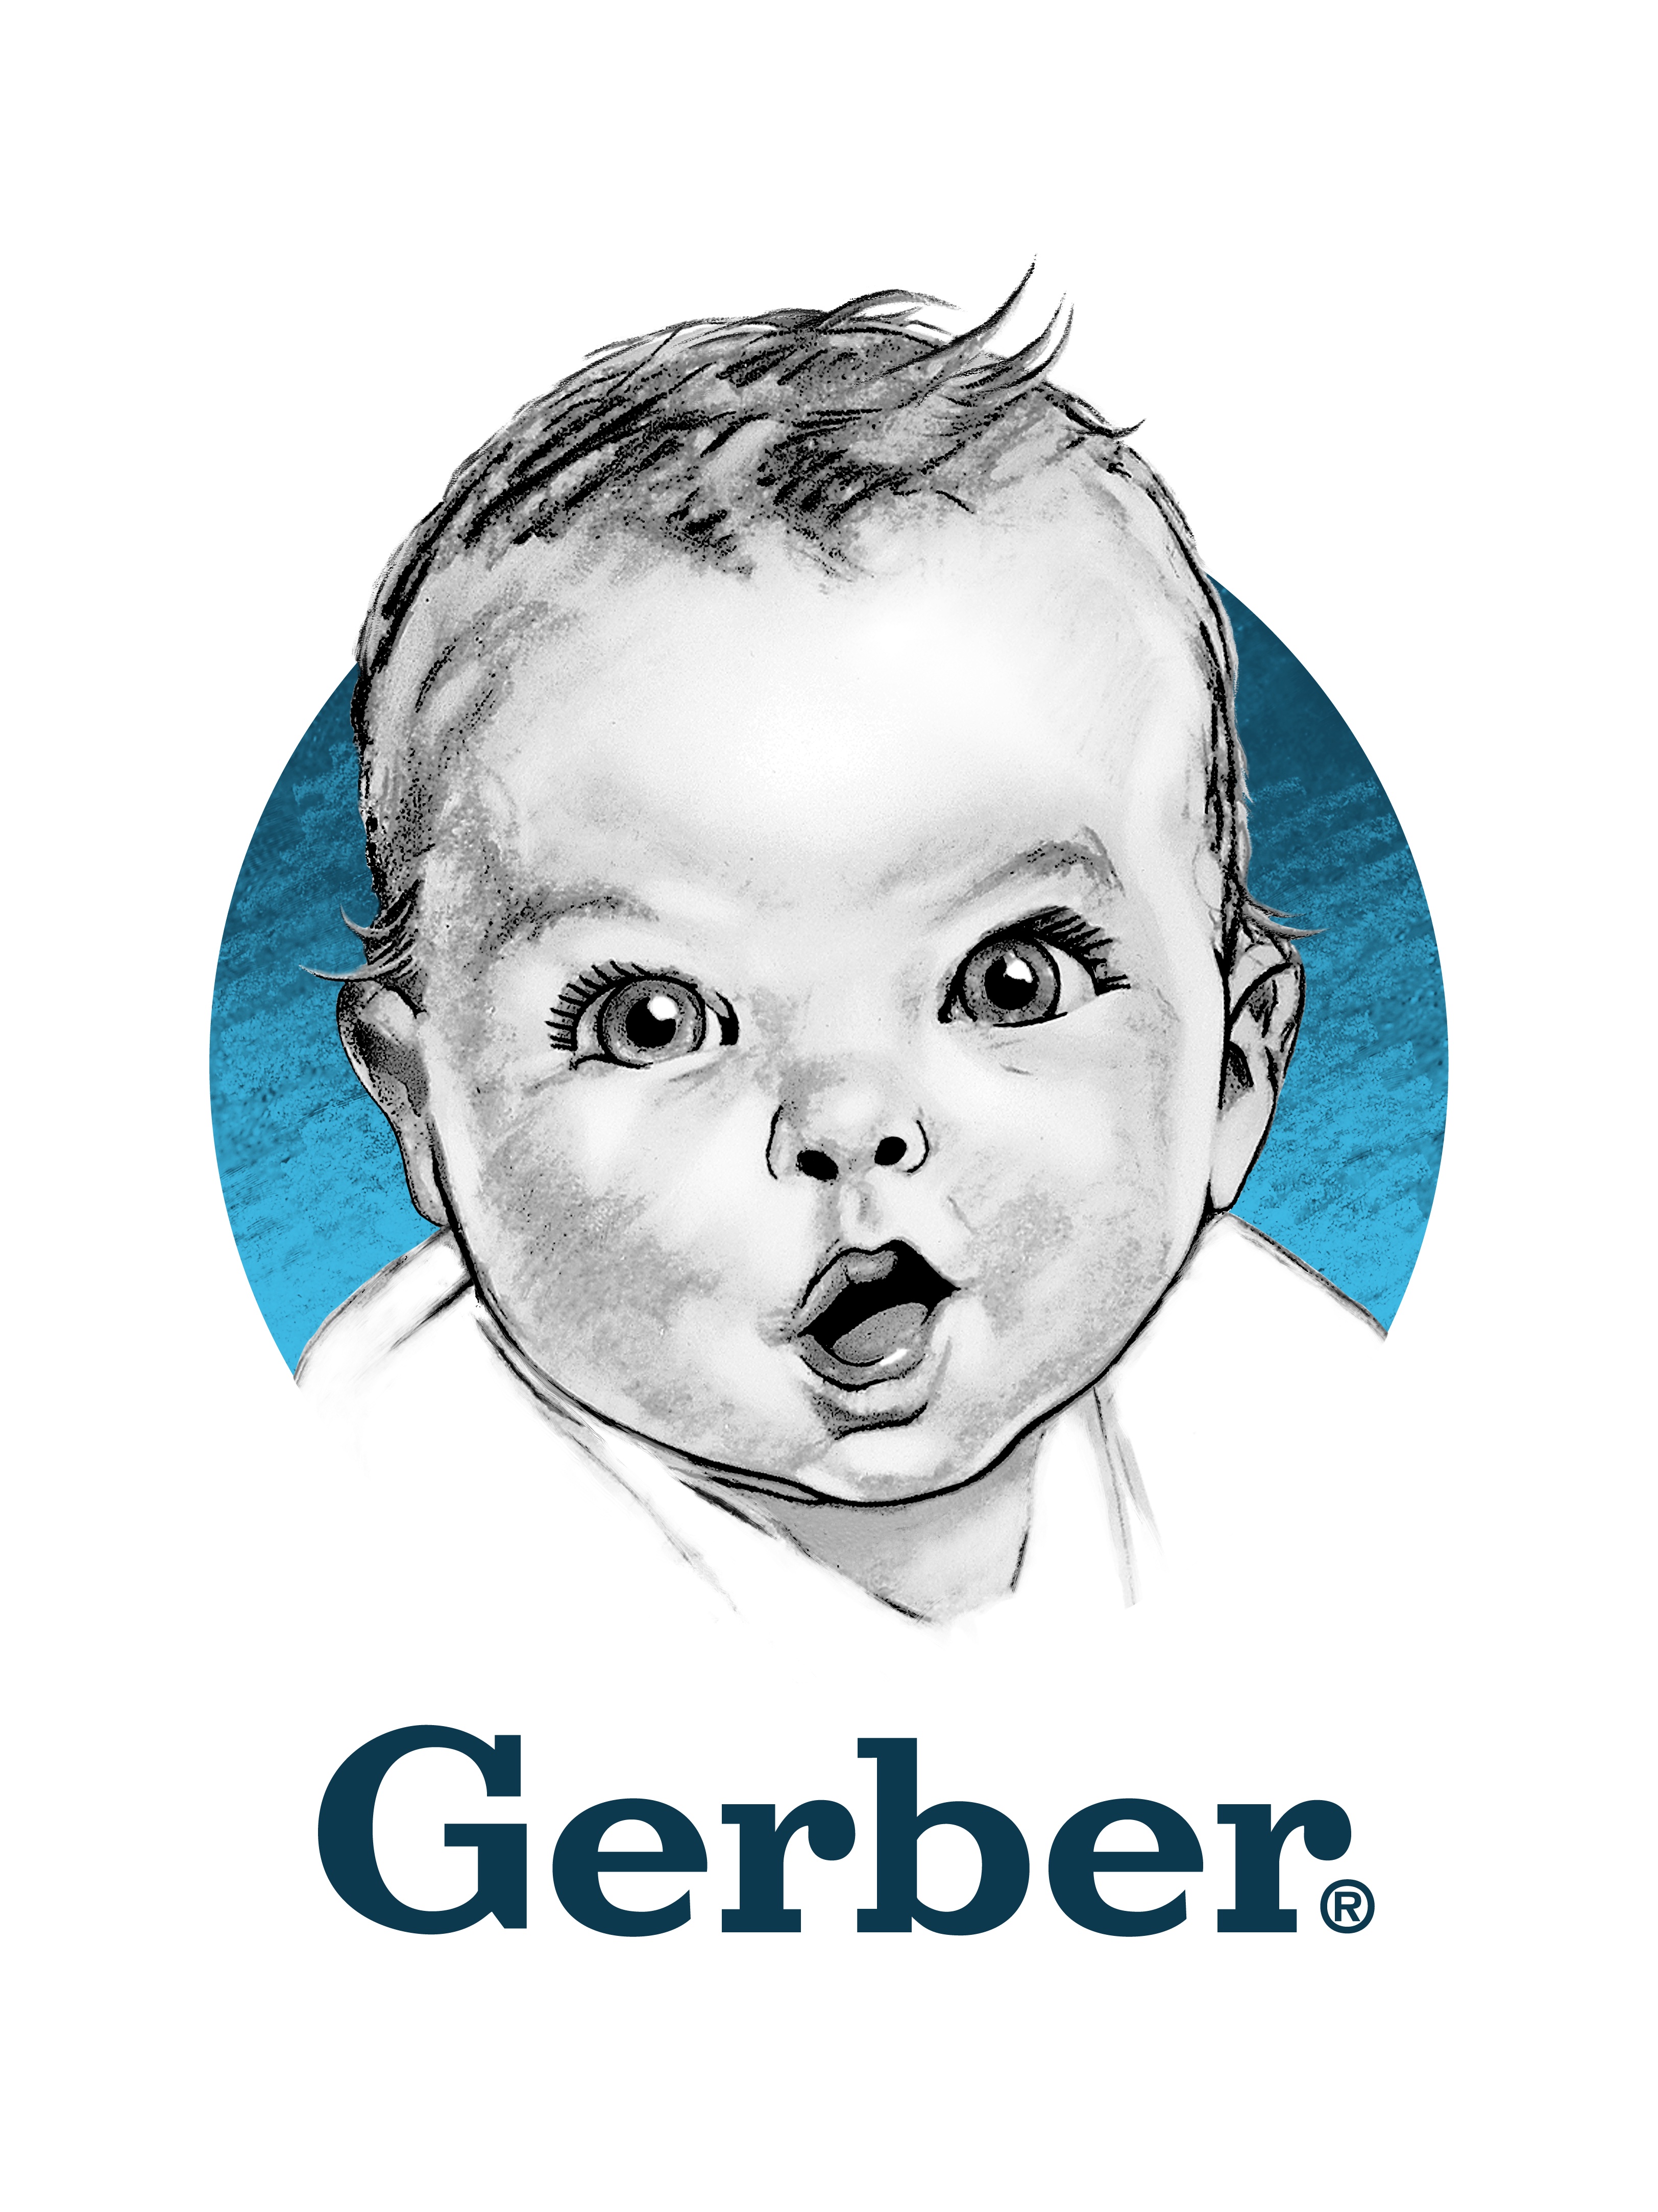 More from Gerber - Products and Services